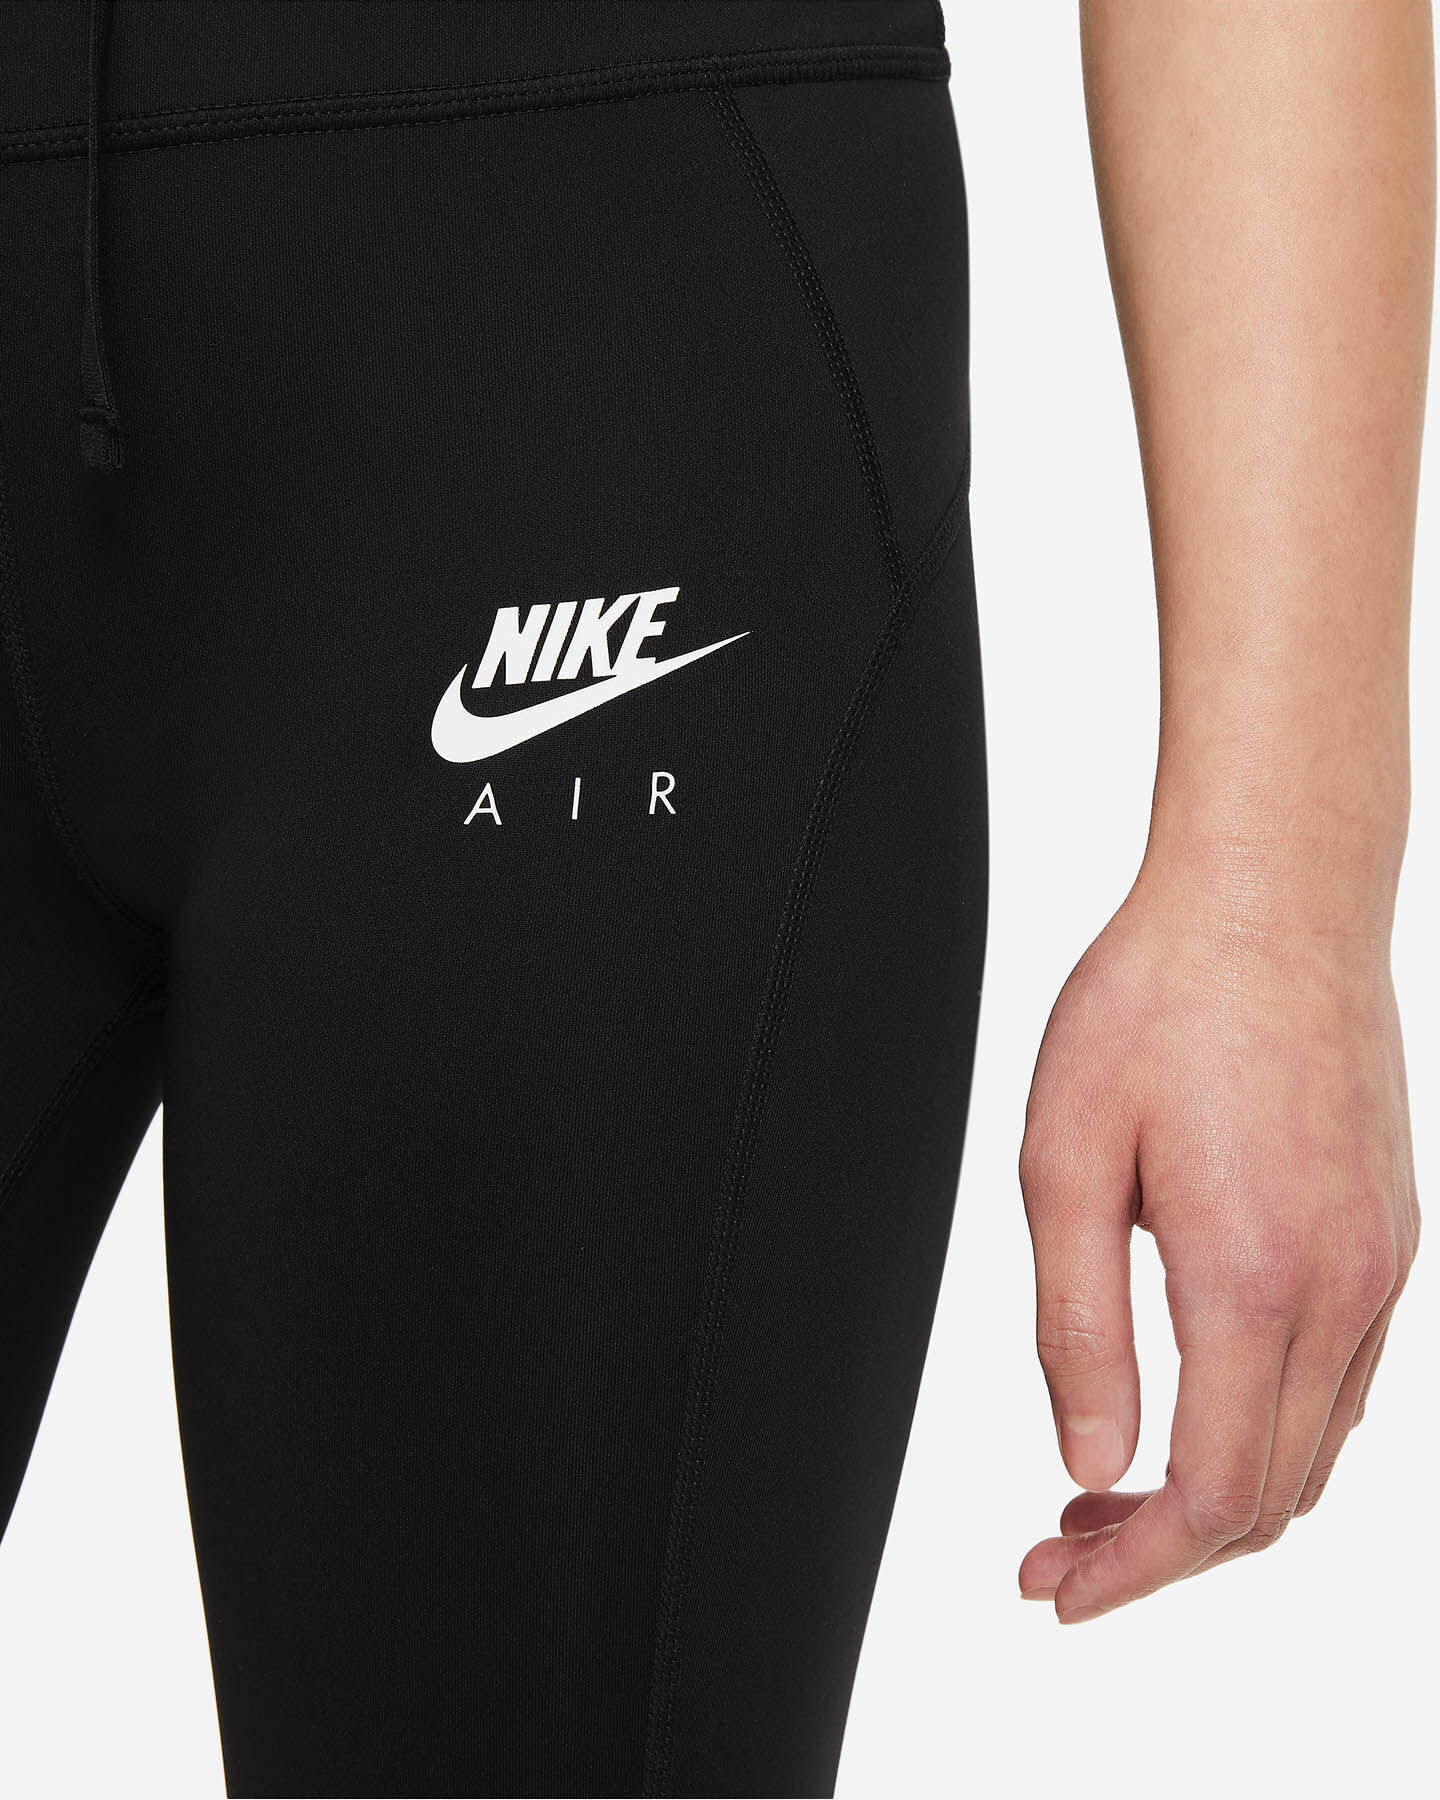  Leggings NIKE POLY AIR JR S5320230|010|S scatto 2